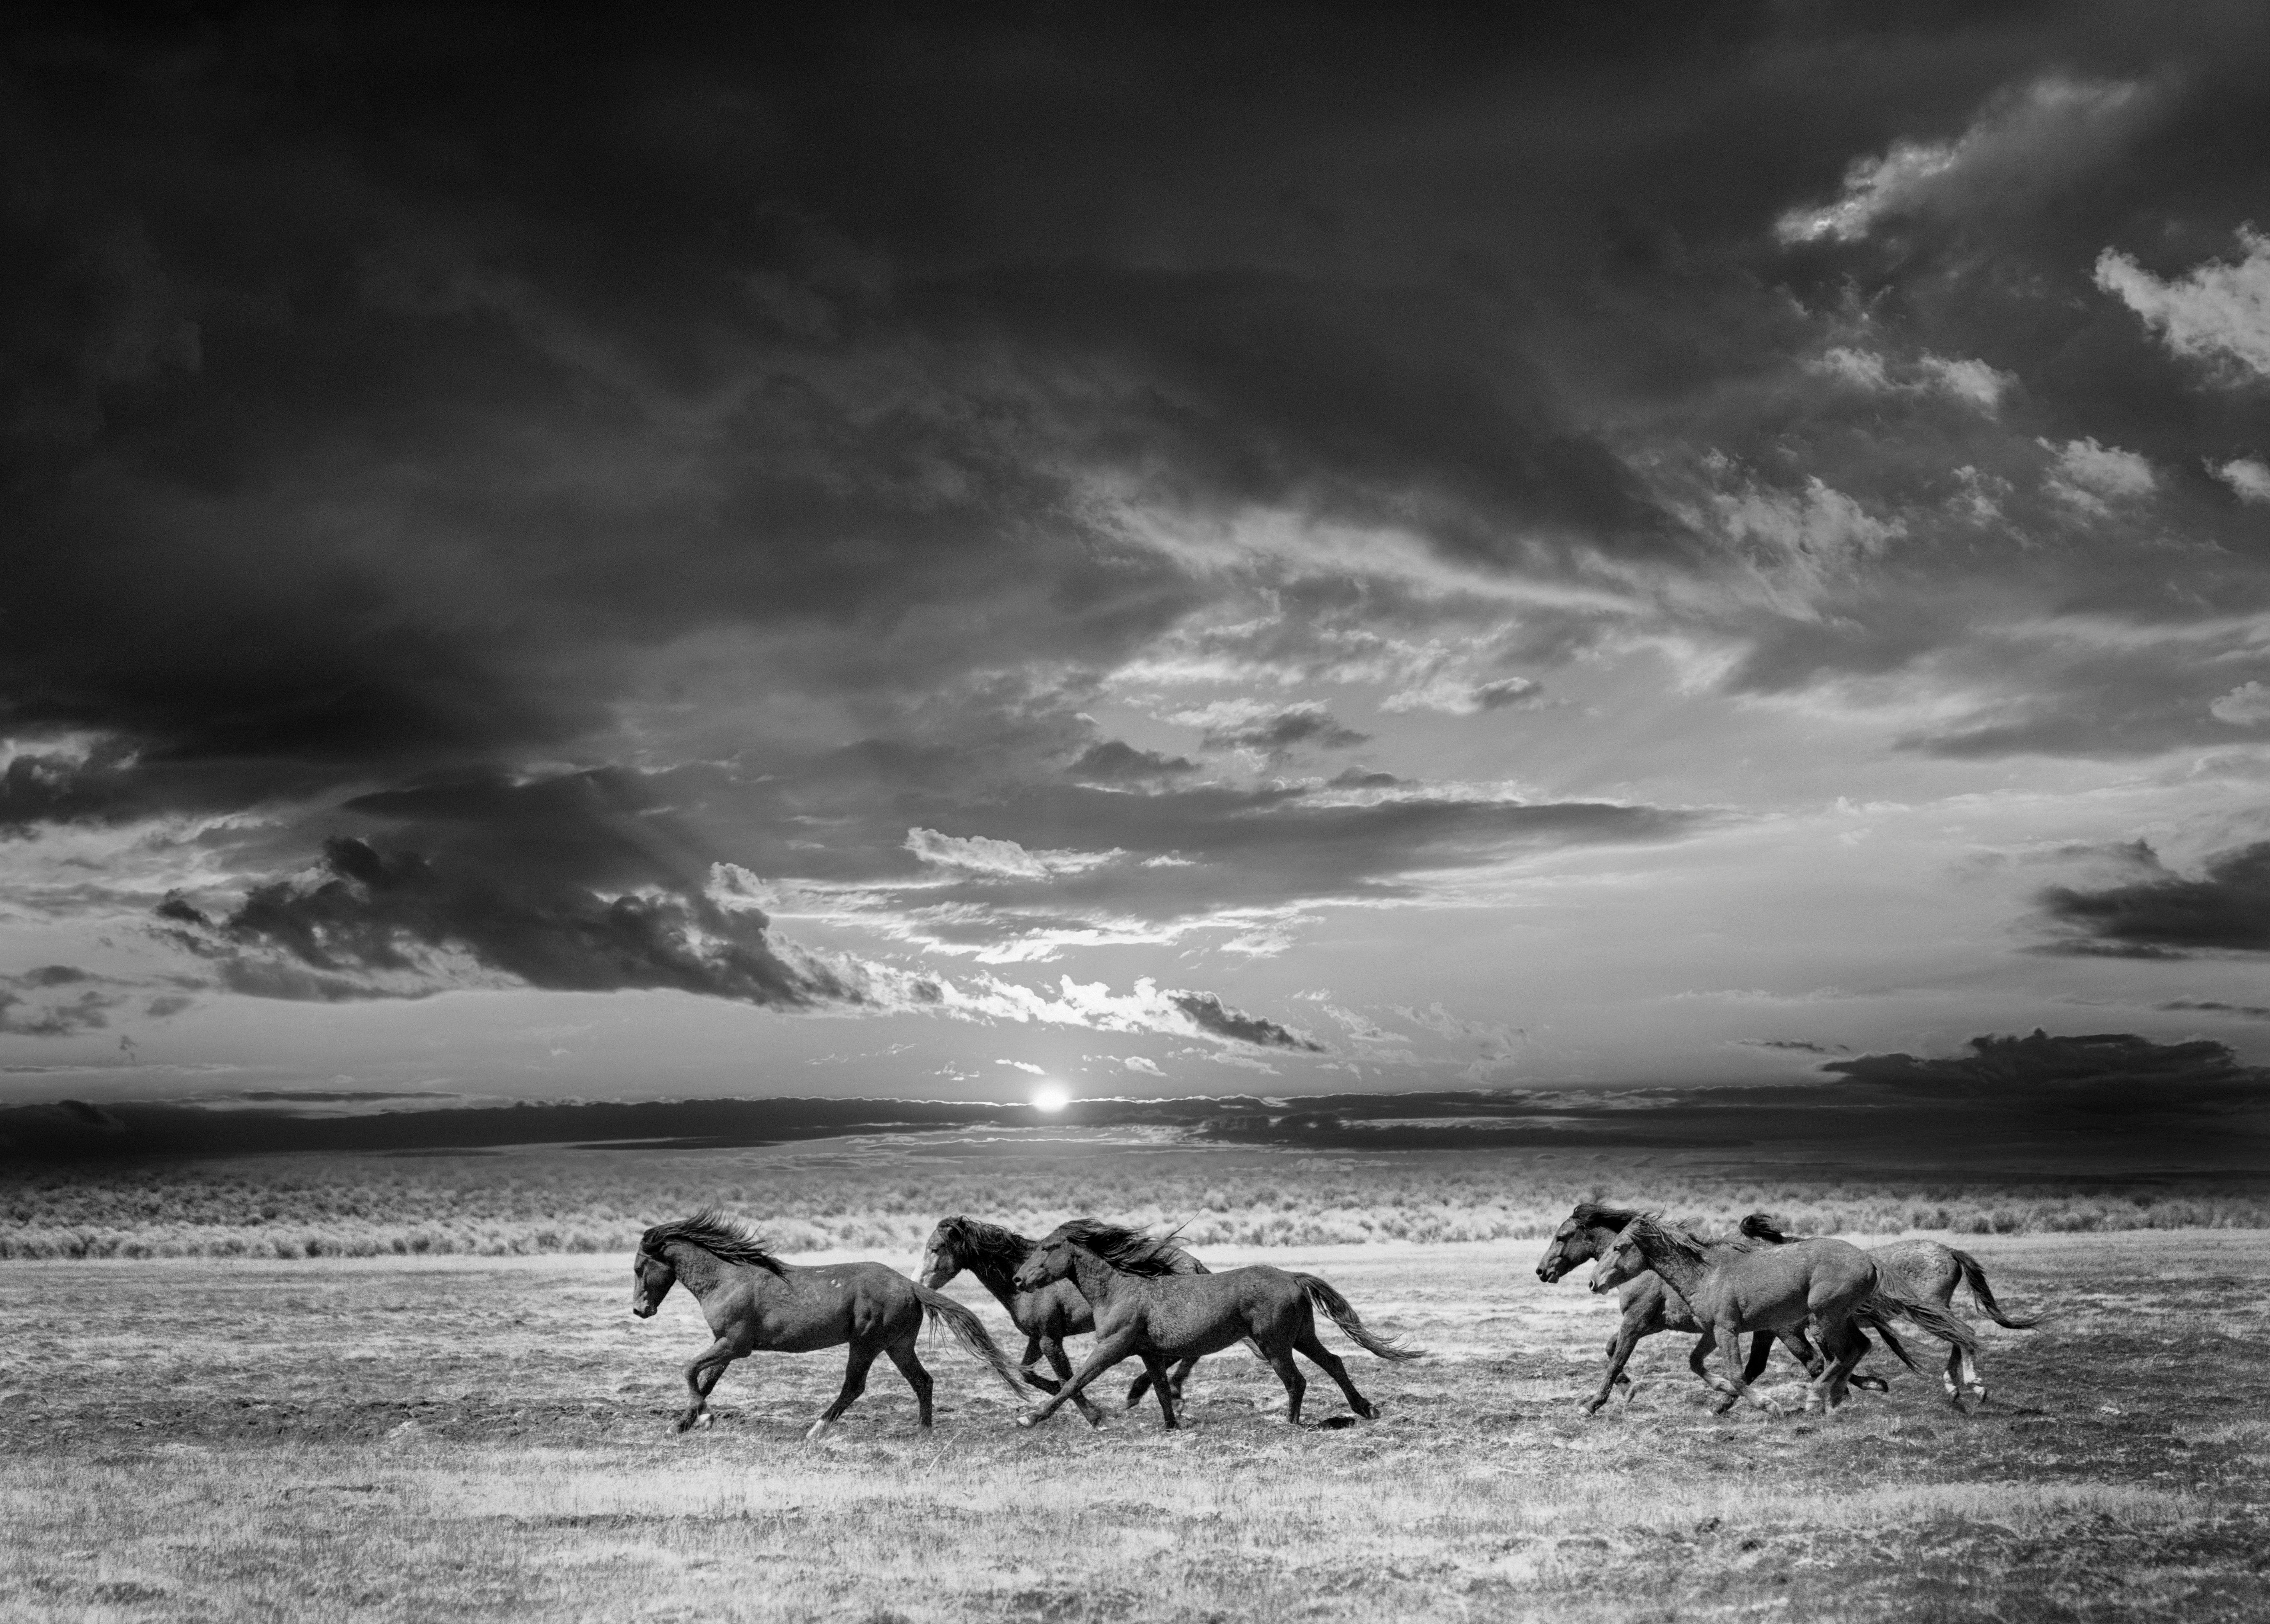 "Chasing the Light" 36x48 Black and White Photography of Wild Horses, Photograph